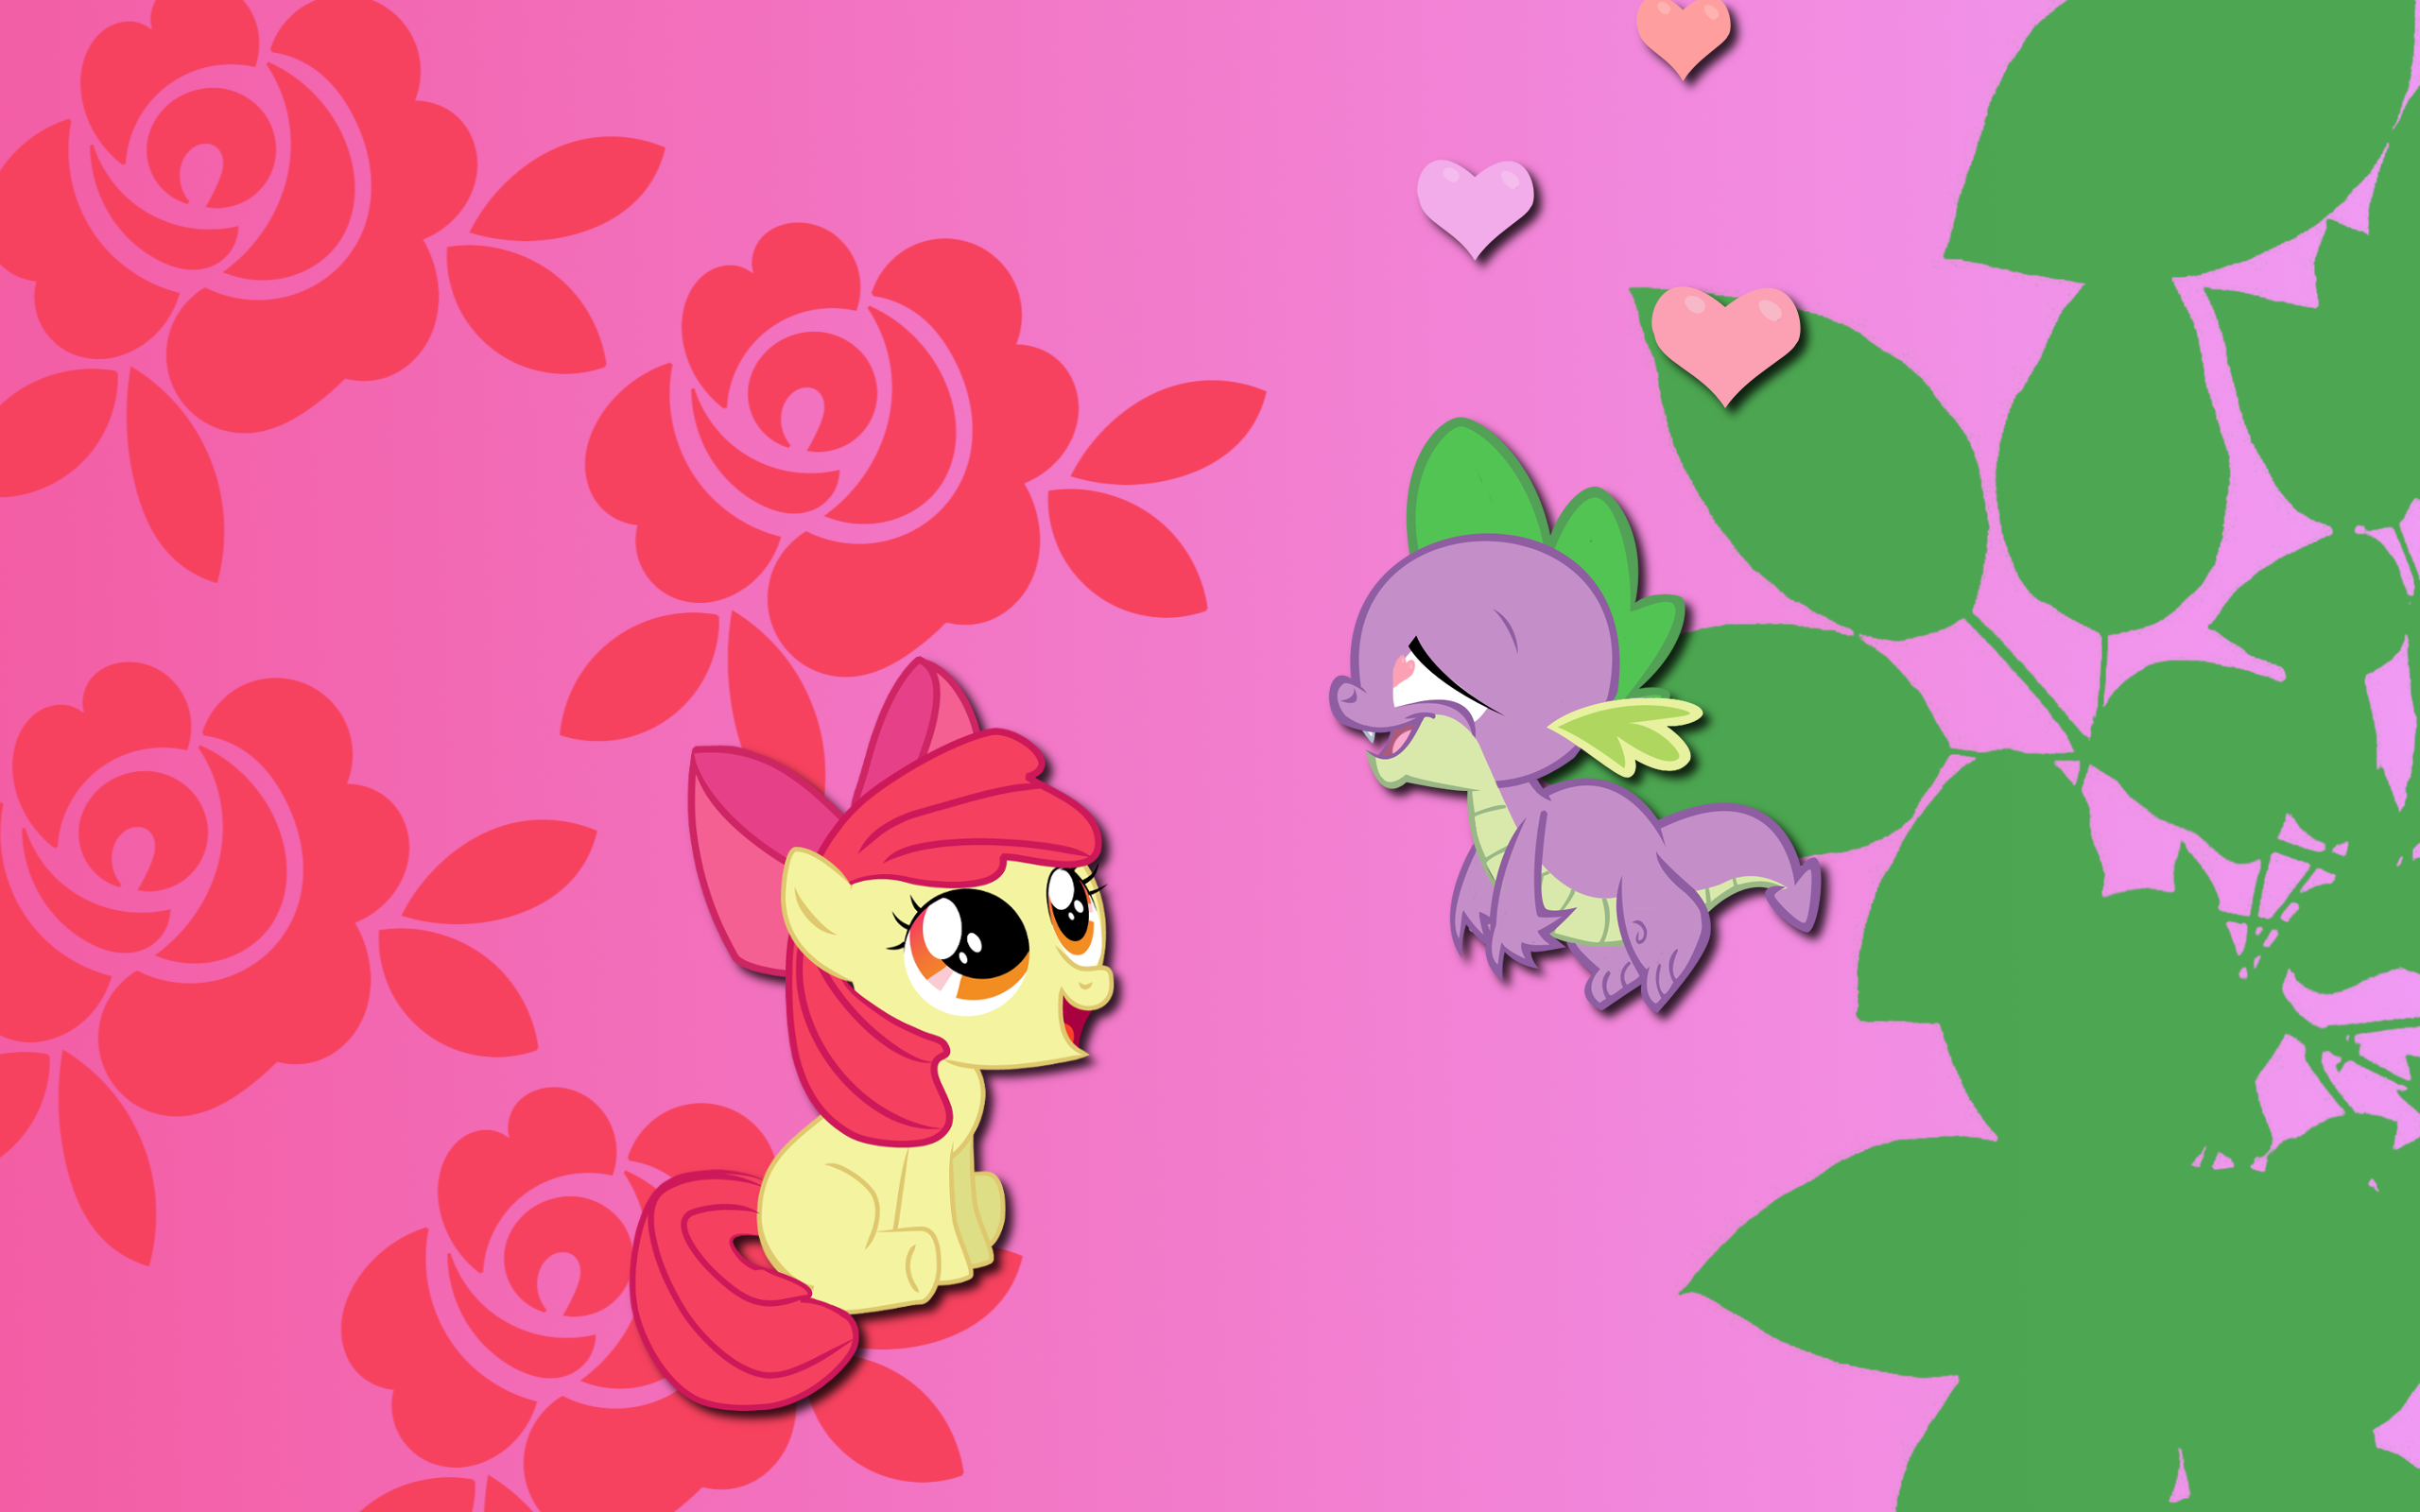 Spike Bloom wallpaper by AliceHumanSacrifice0, Creshosk and NightmareMoonS